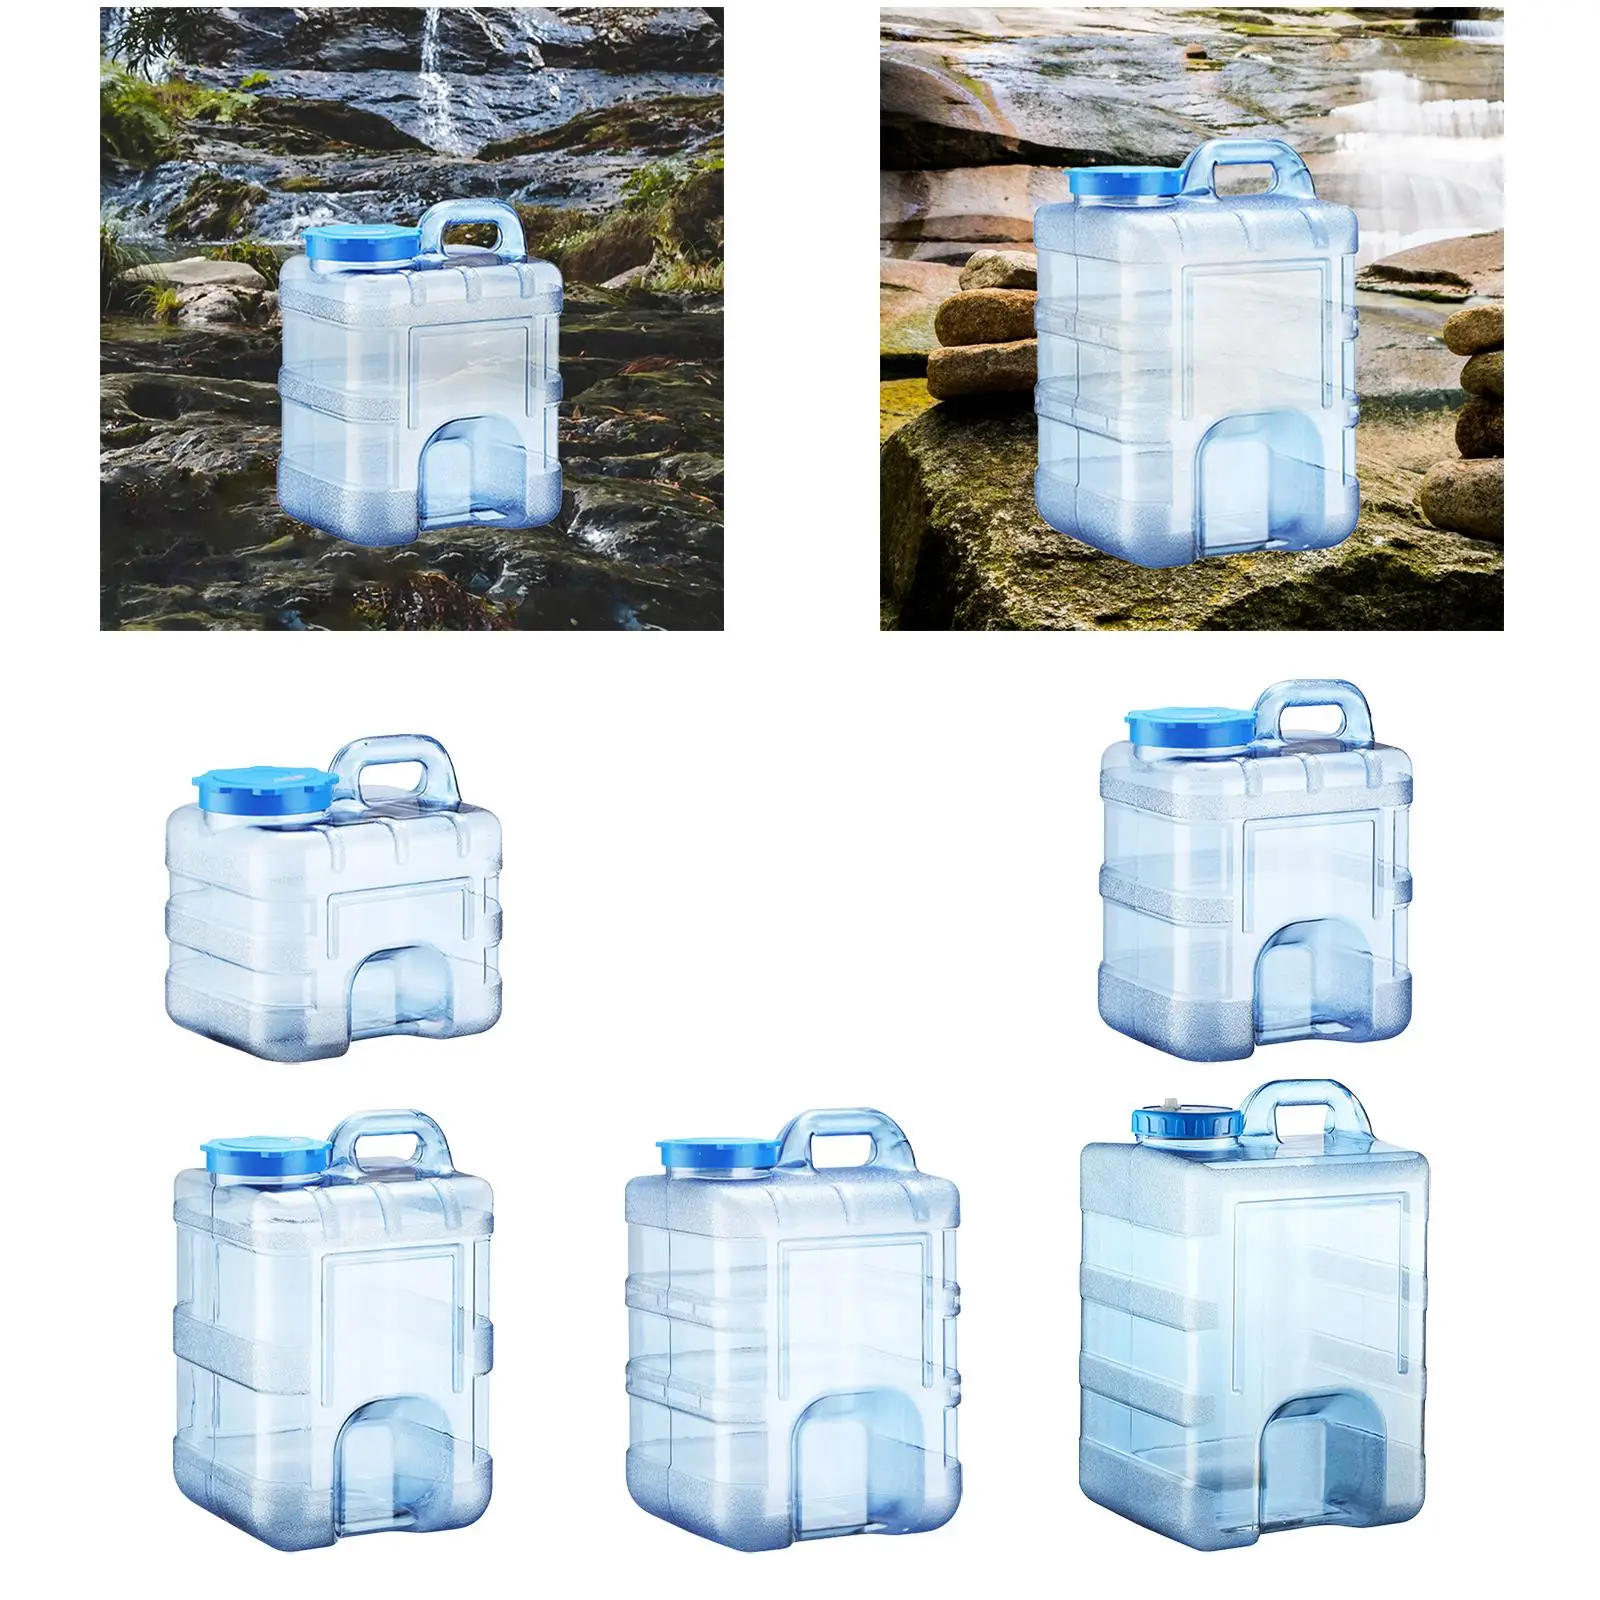 Camping Water Container, Water Storage Bucket, Water Bottle Carrier for Backpacking